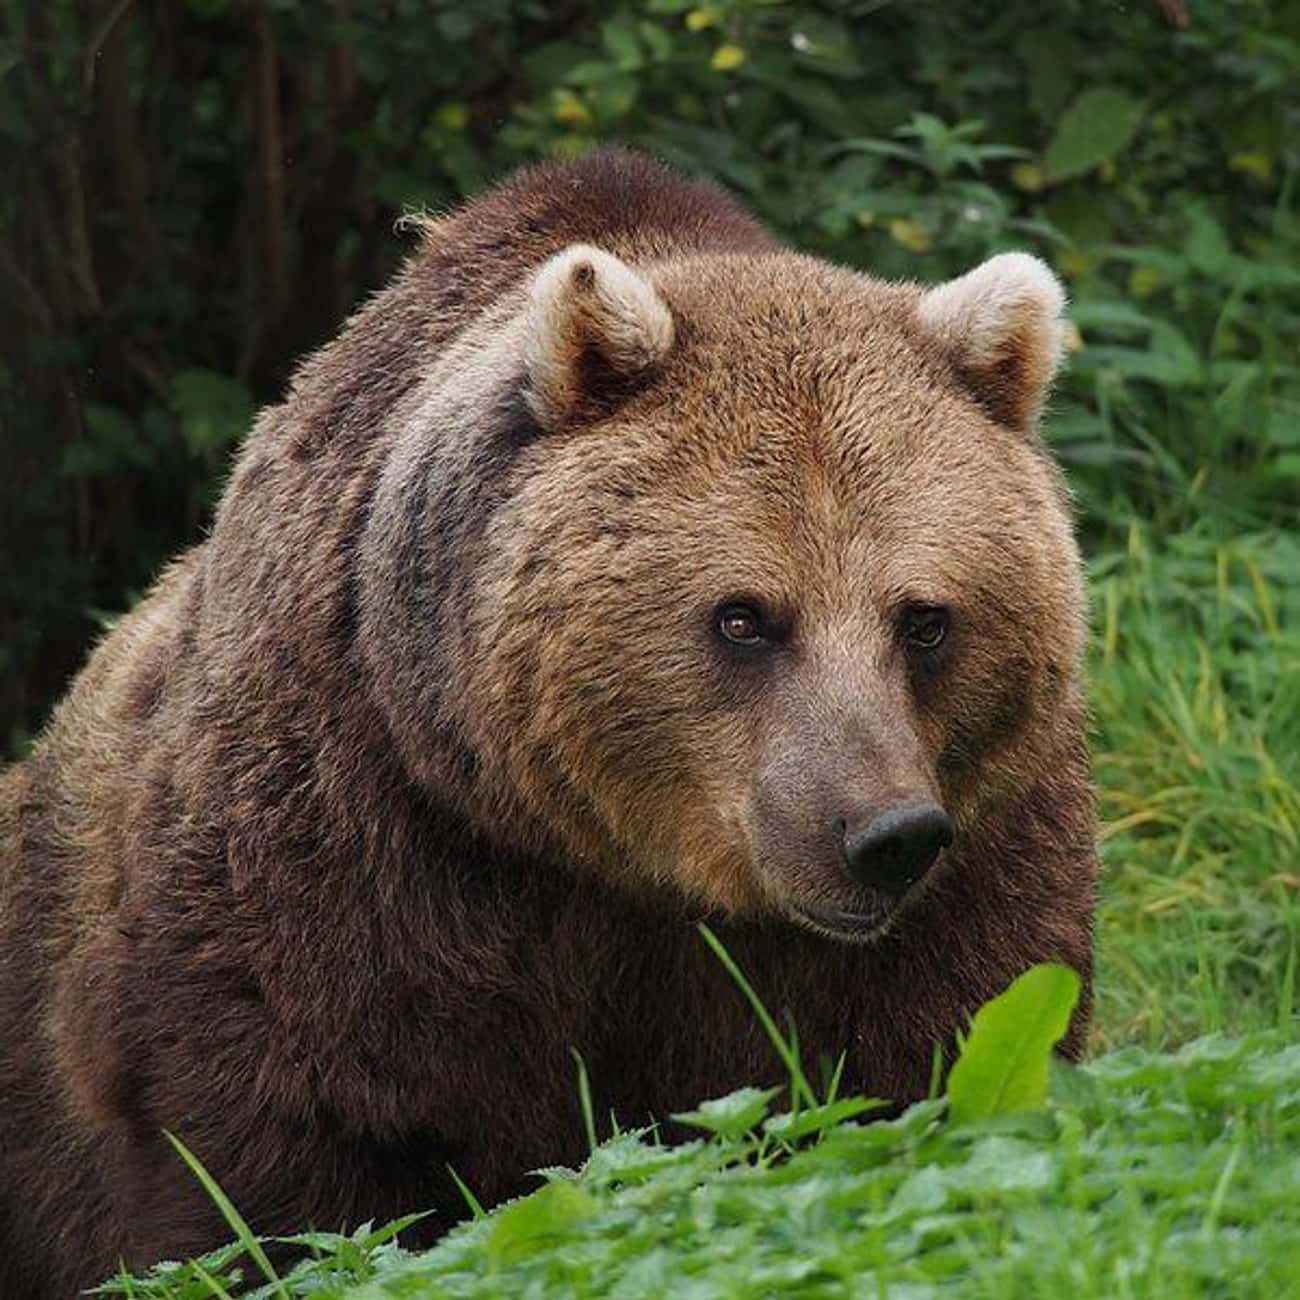 Katya The Bear Served 15 Years In Jail Before Being Released To A Zoo